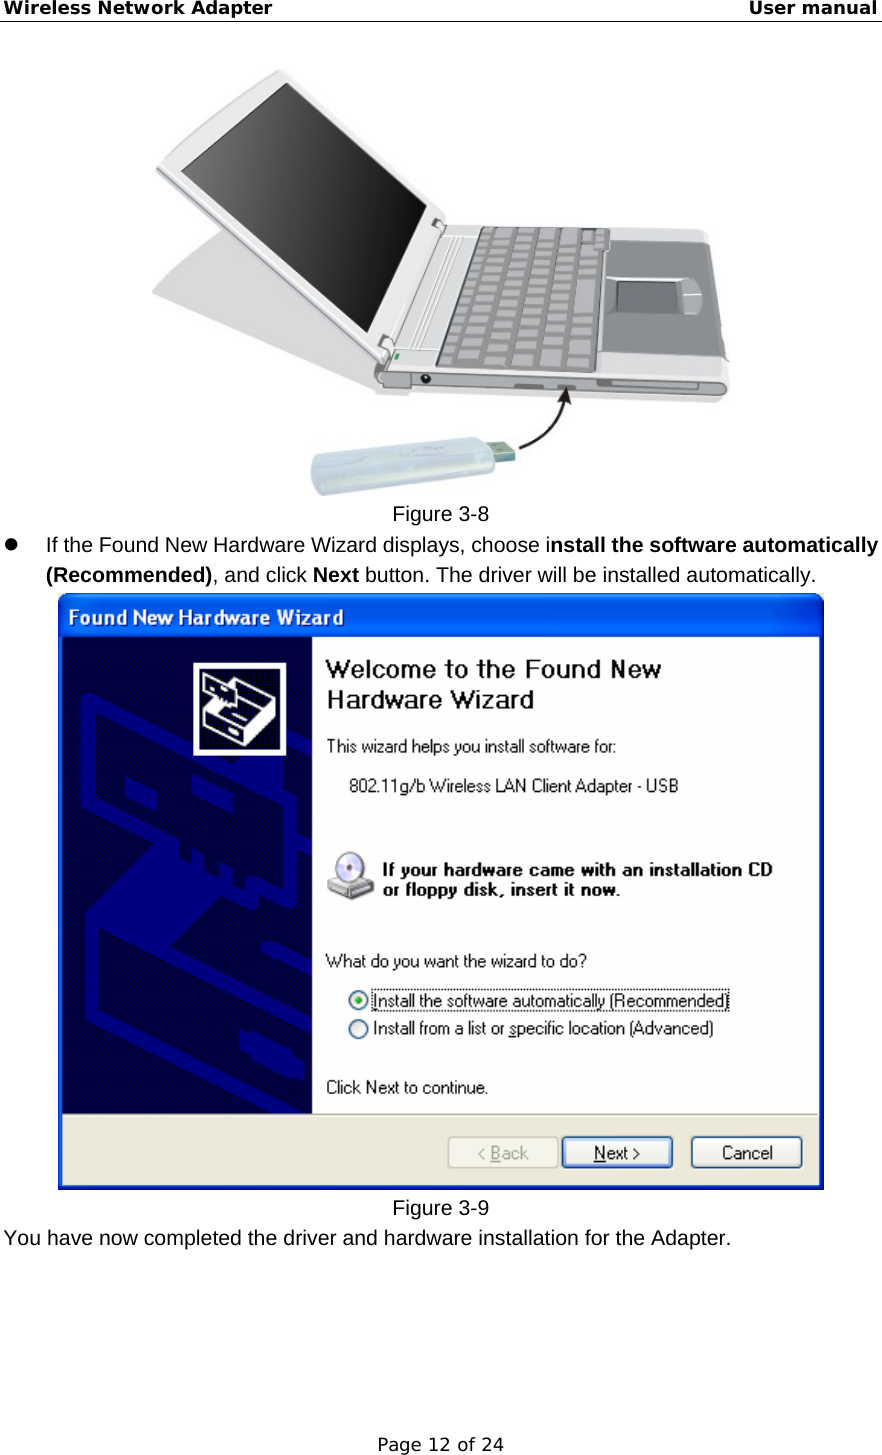 Wireless Network Adapter                                                    User manual Page 12 of 24  Figure 3-8 z  If the Found New Hardware Wizard displays, choose install the software automatically (Recommended), and click Next button. The driver will be installed automatically.  Figure 3-9 You have now completed the driver and hardware installation for the Adapter. 